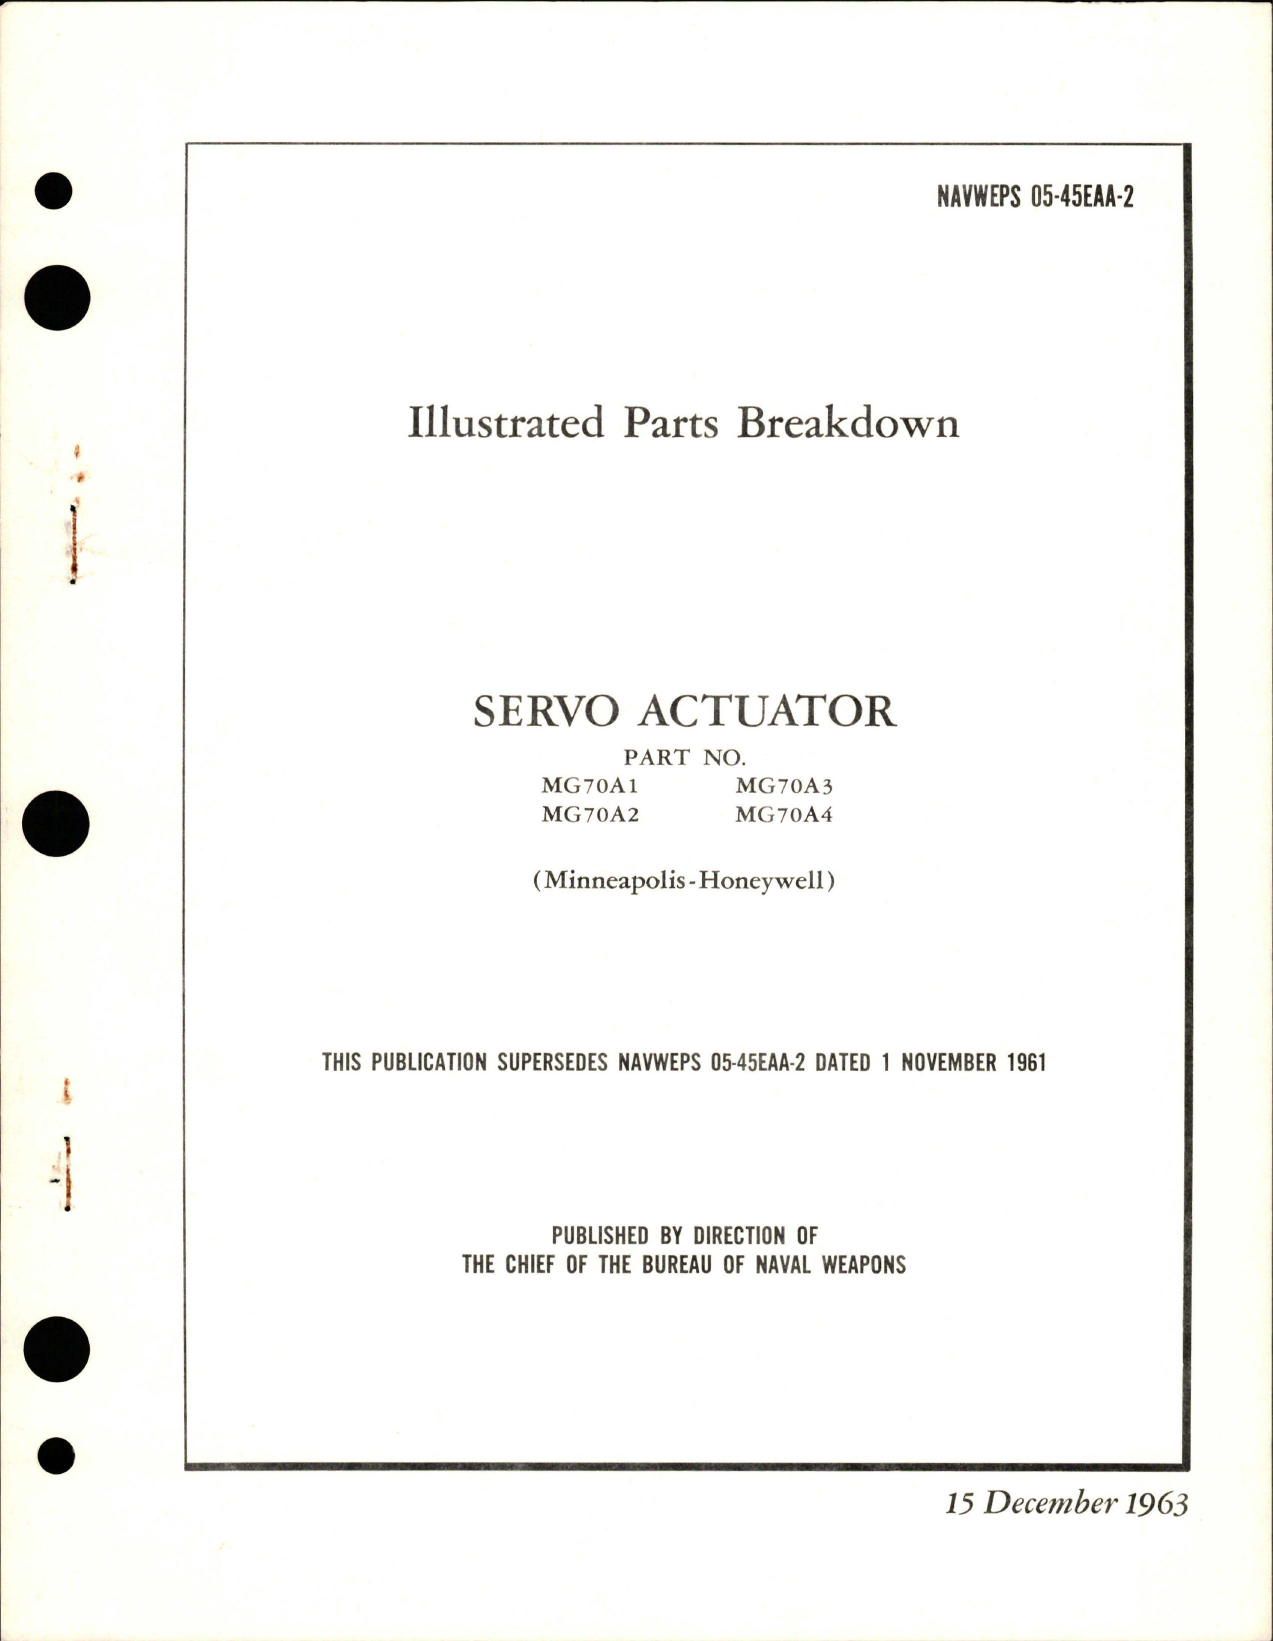 Sample page 1 from AirCorps Library document: Illustrated Parts Breakdown for Actuator-Servo - Parts MG70A1, MG70A2, MG70A3, MG70A4